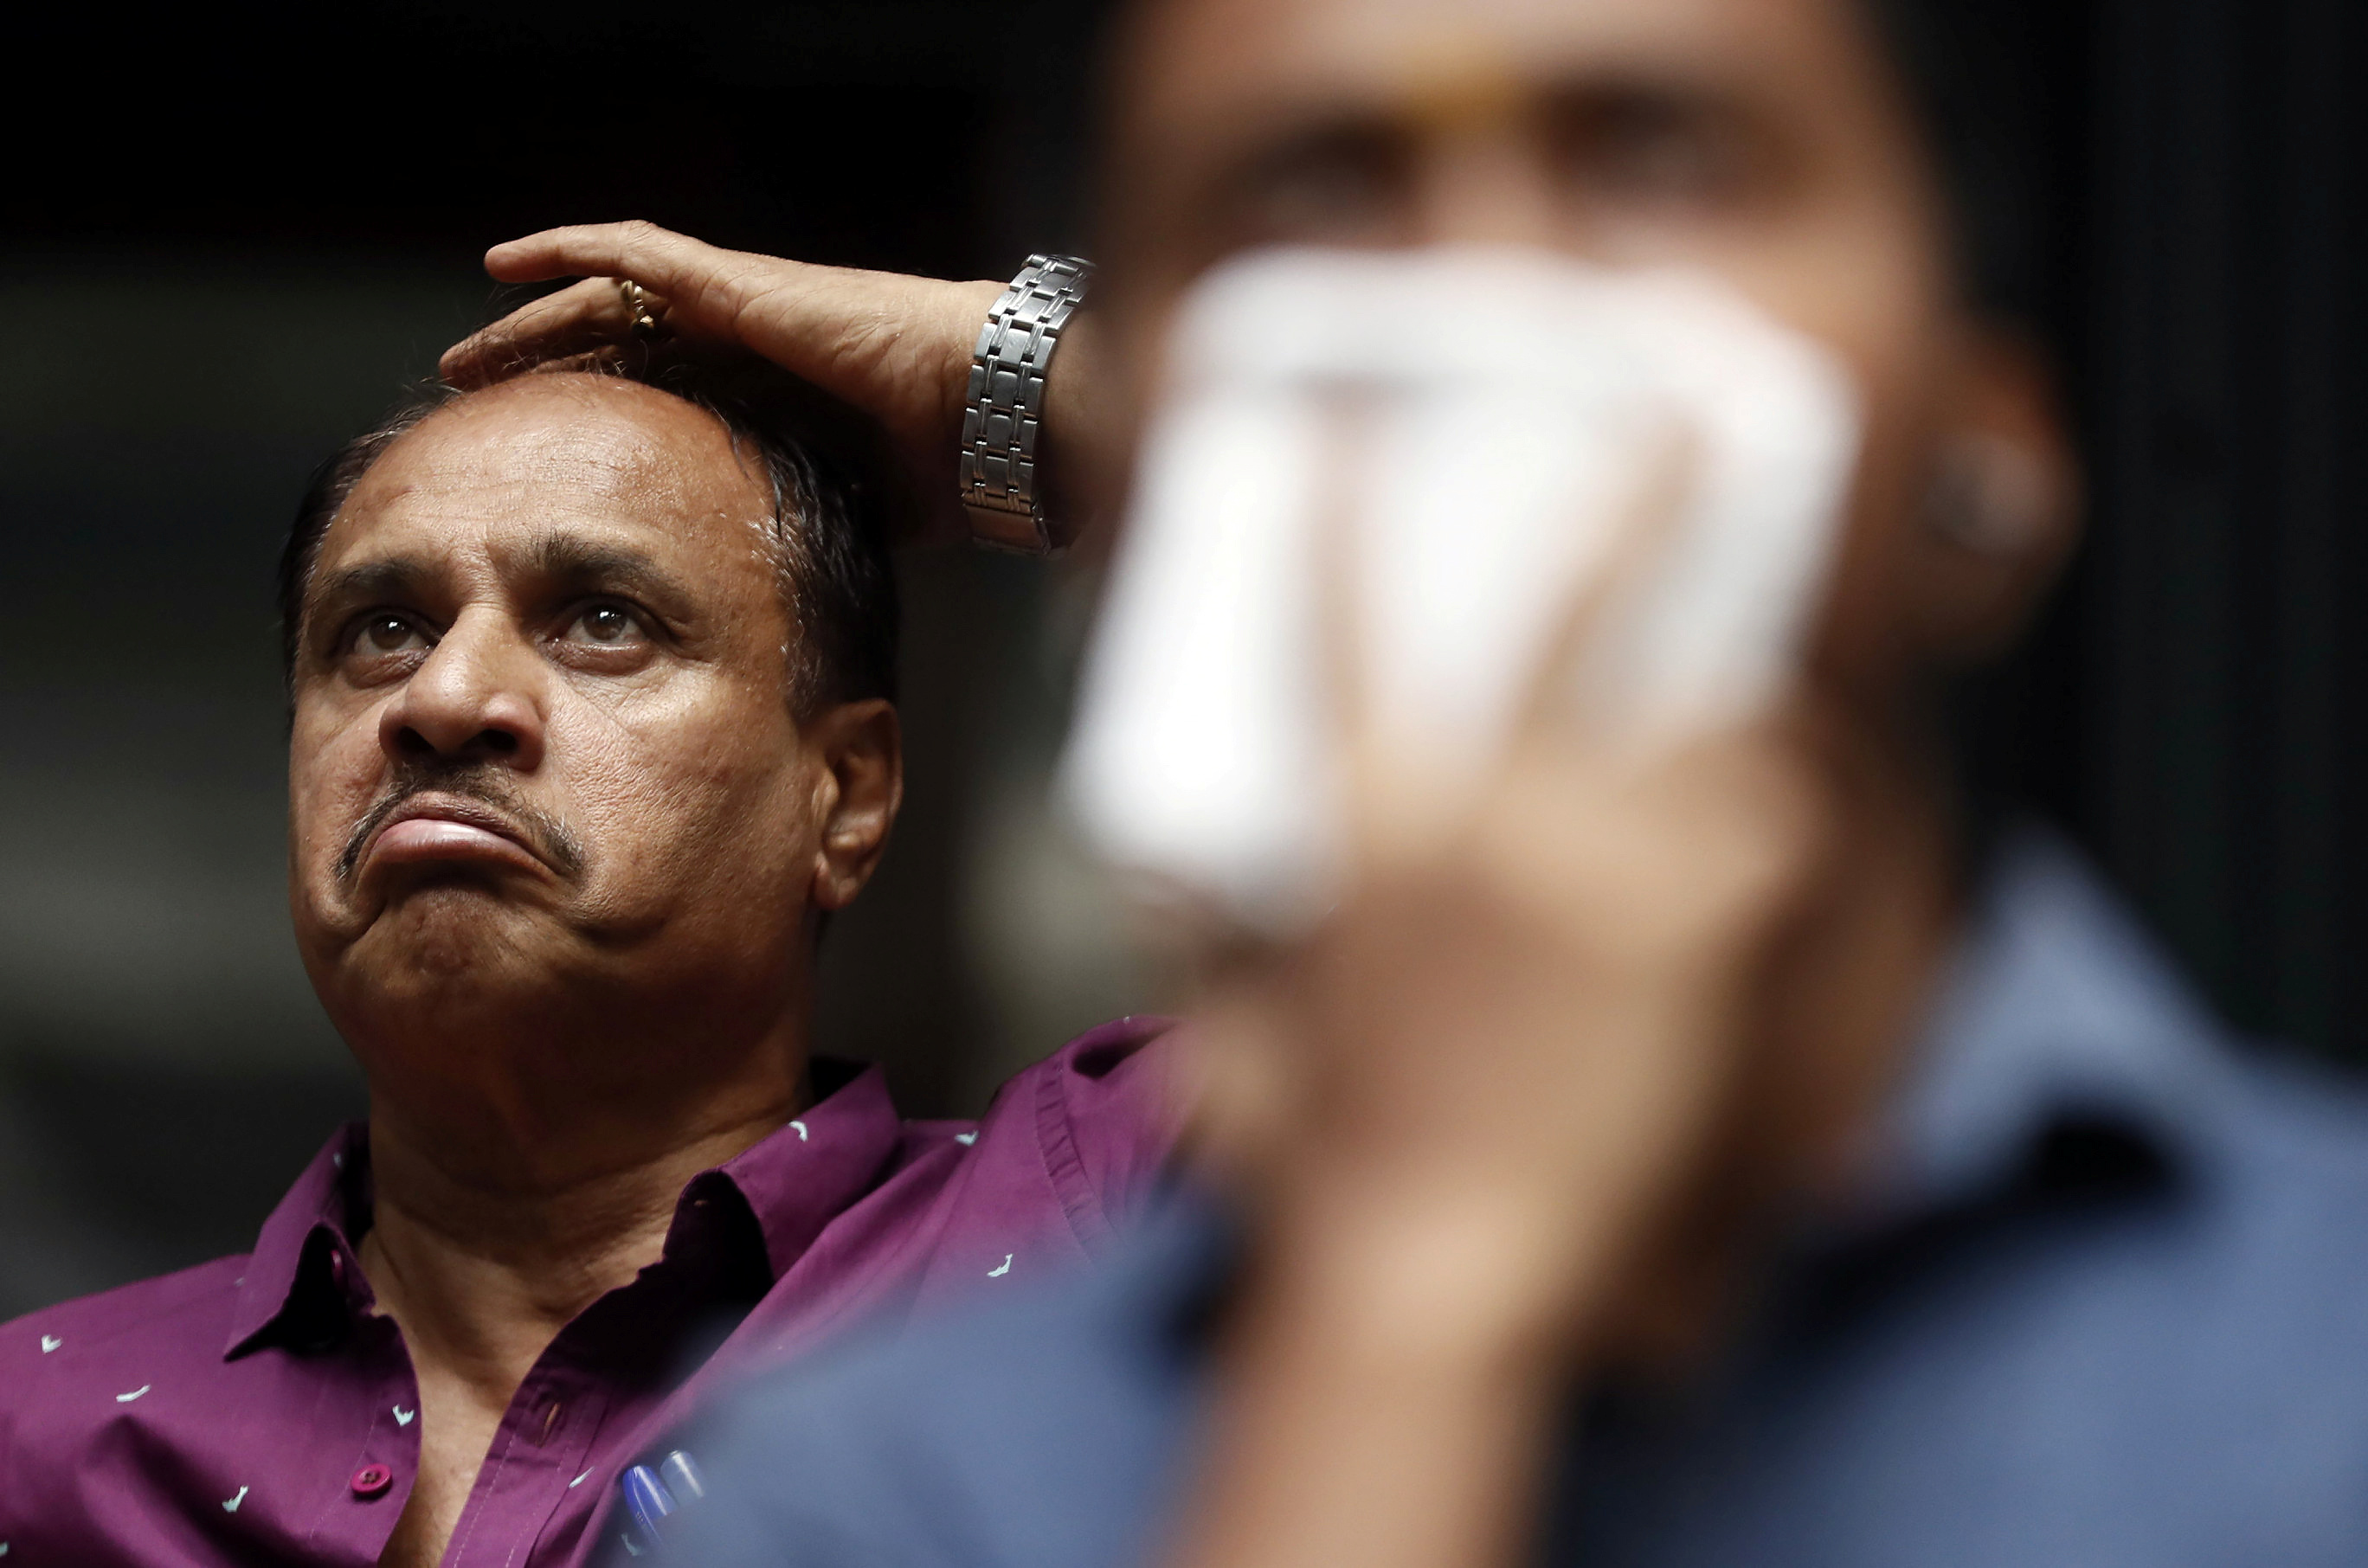 Man reacts as he looks at screen displaying Sensex results on BSE building in Mumbai